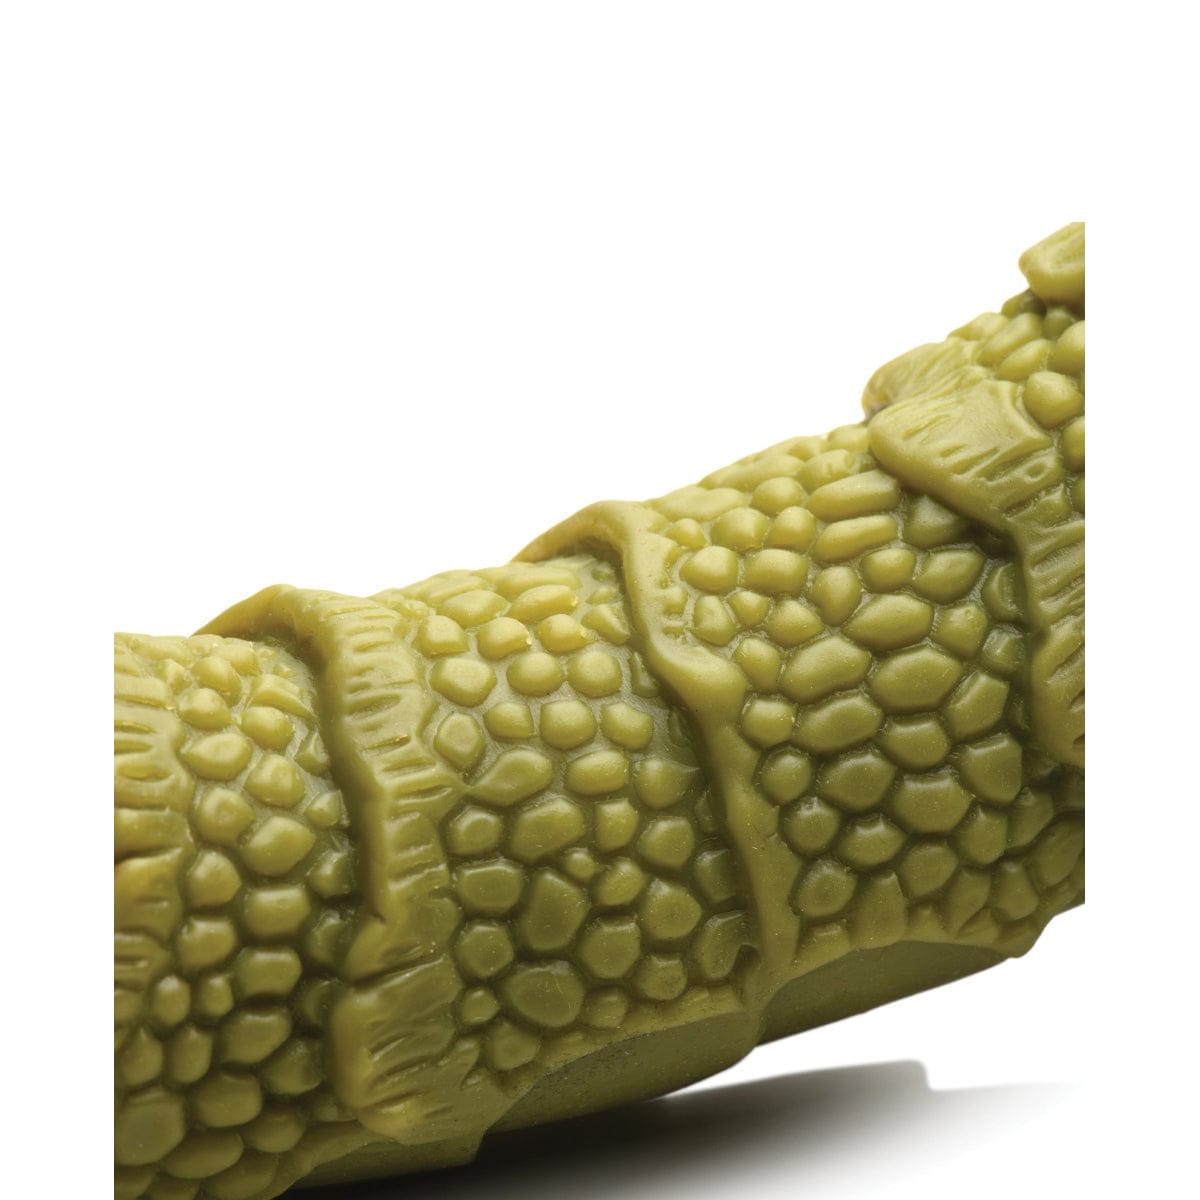 XR - Creature Cocks Swamp Monster Scaly Silicone Dildo (Green)    Non Realistic Dildo with suction cup (Non Vibration)